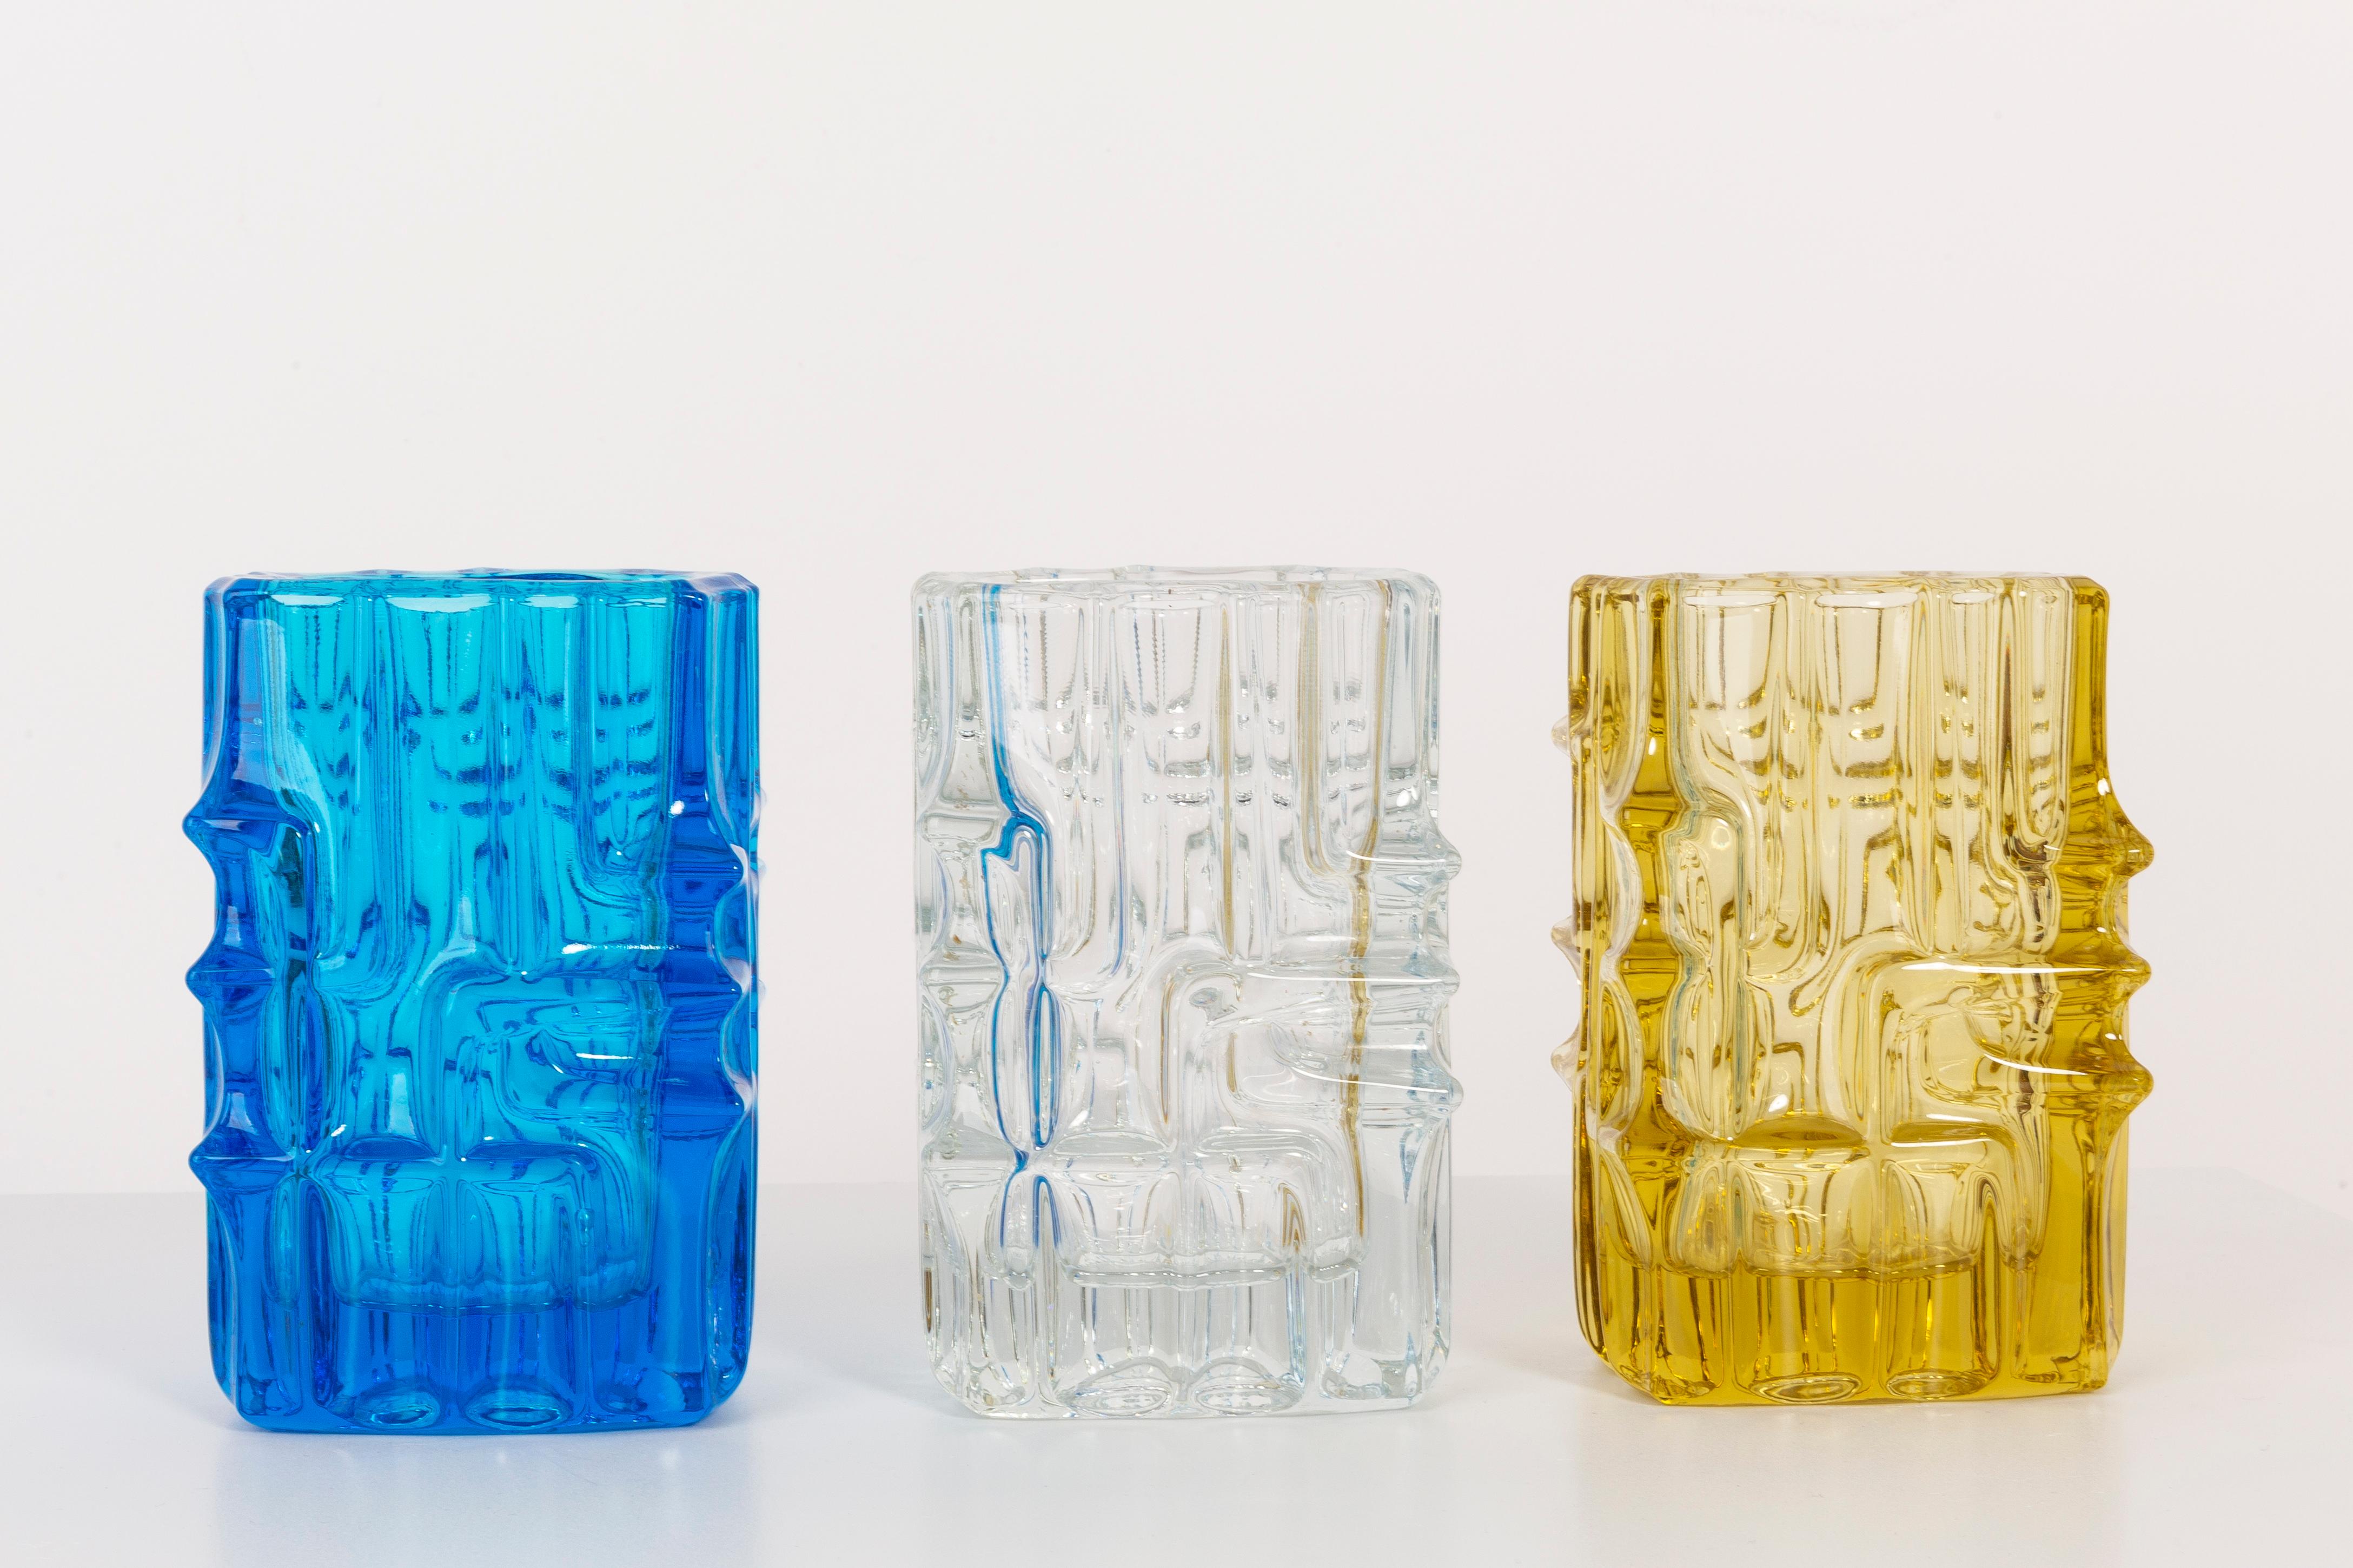 Set of Three Vases by Vladislav Urban, Czechoslovakian glass designer. Produced in 1960s.
Pressed glass in perfect condition. The vases looks like it has just been taken out of the box.
No jags, defects etc. The outer relief surface, the inner